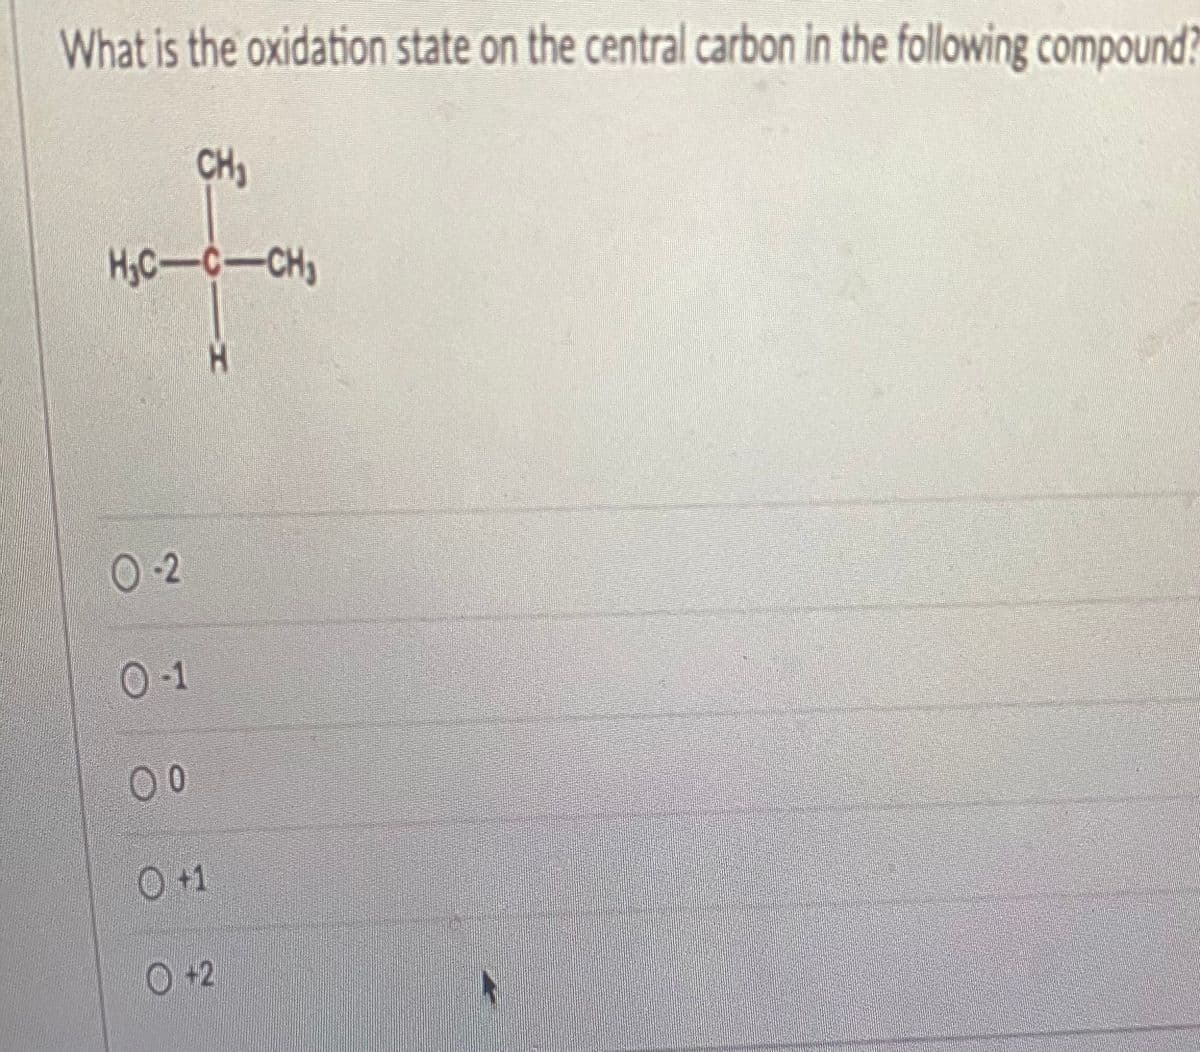 What is the oxidation state on the central carbon in the following compound?
CH₂
H₂C-C-CH₂
H
0-2
0-1
00
0 +1
+2